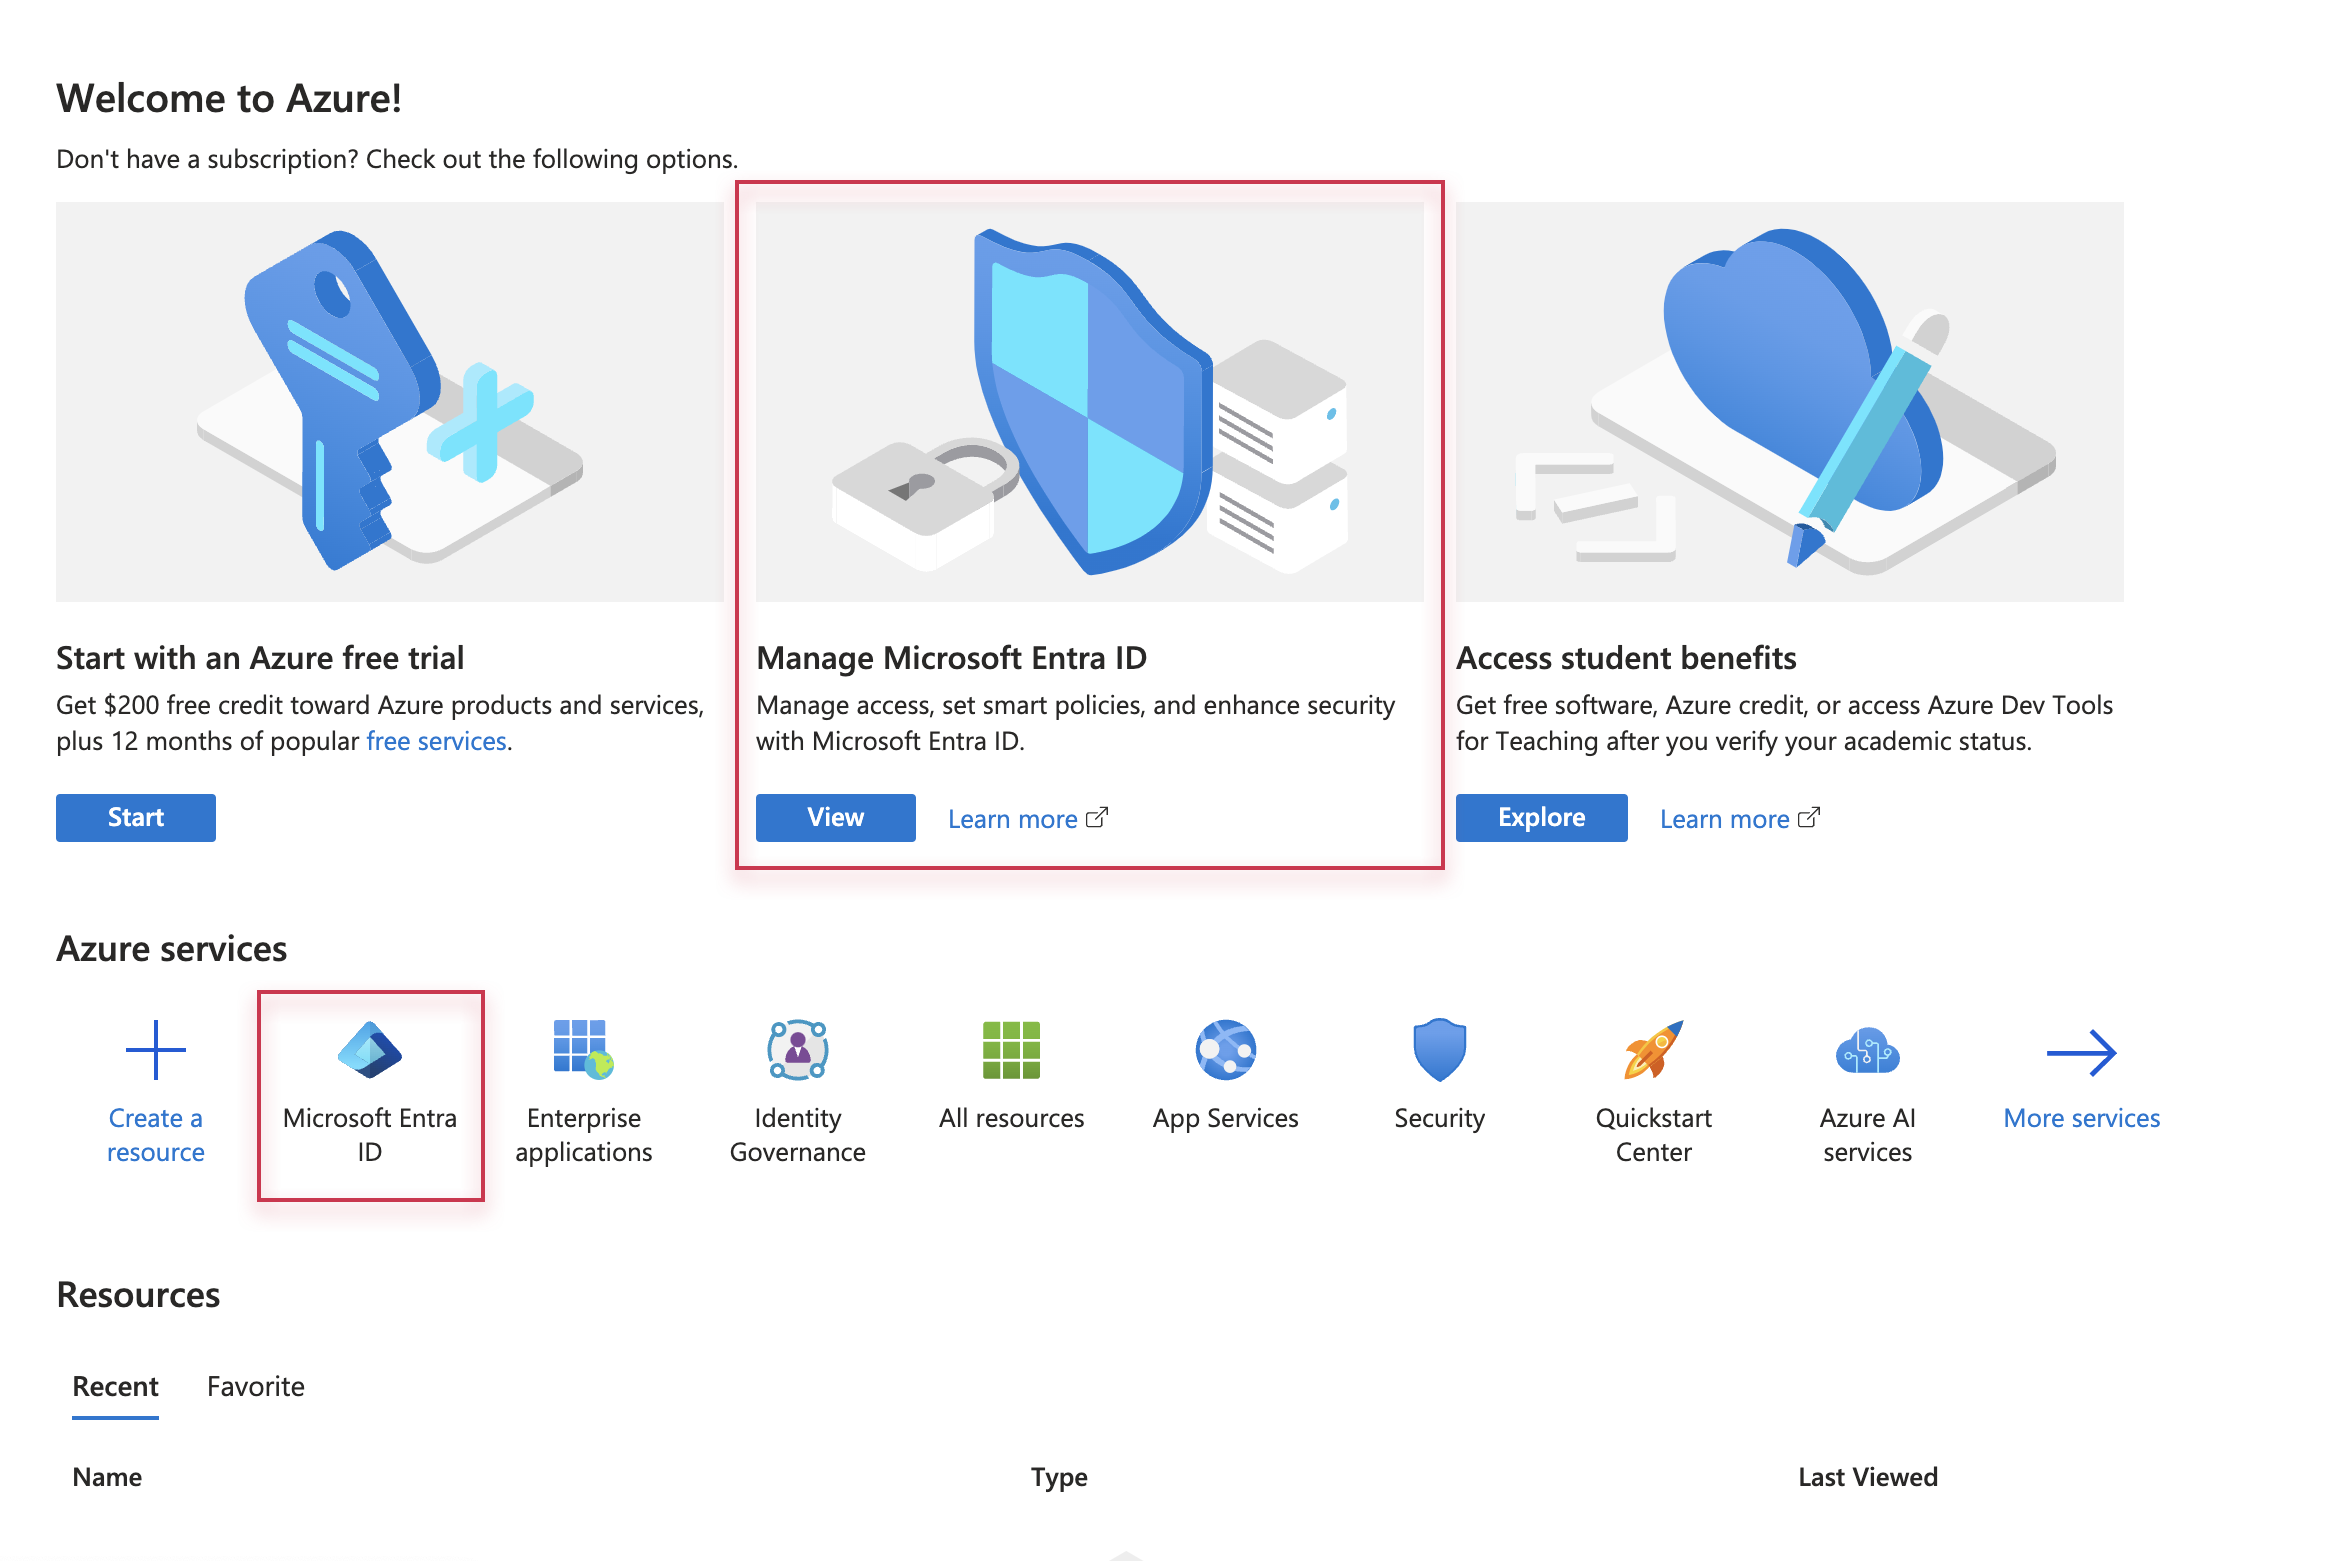 On the Azure landing page, there are three horizontal sections. The top section is titled Welcome to Azure! Below that is Azure services. And below that is Resources. Under Welcome to Azure, the second item from the left reads Manage Microsoft Entra ID with a button labeled View. Under Azure services, the second item from the left is Microsoft Entra ID, which you can also click to start setting up Azure SSO.